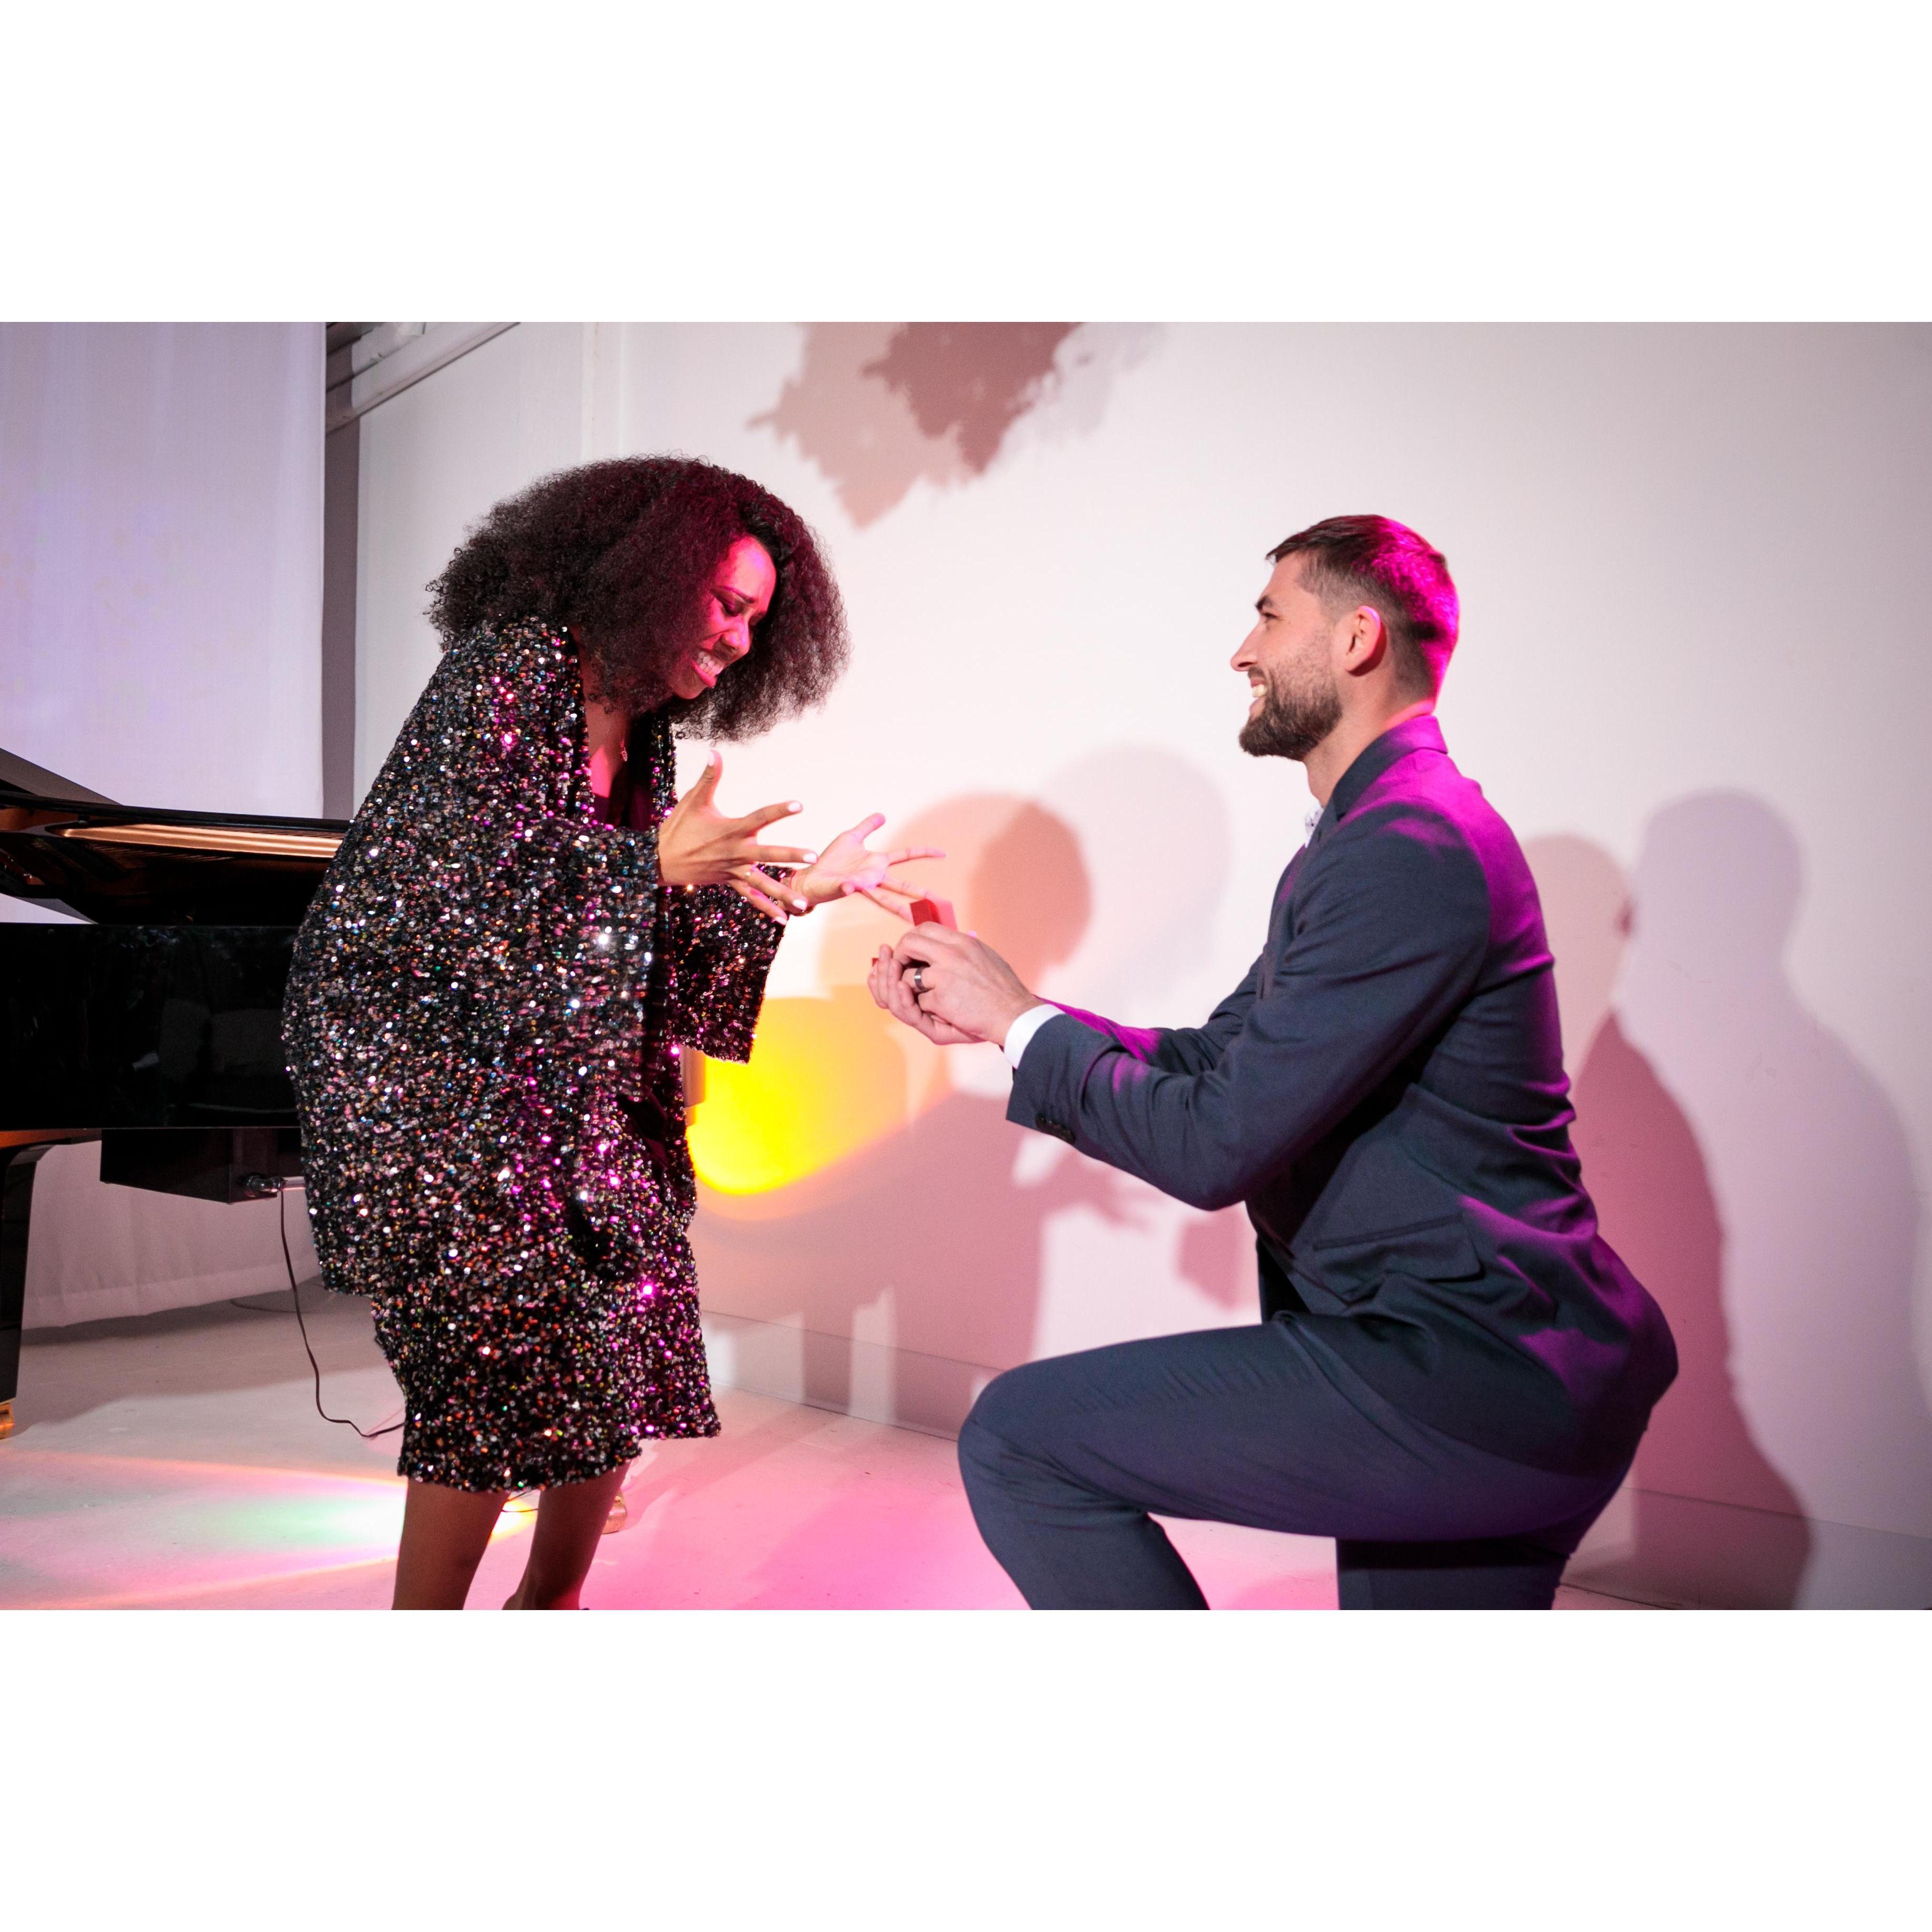 The night of Salisha's 30th Birthday, Andrew got down on a knee and popped the question!